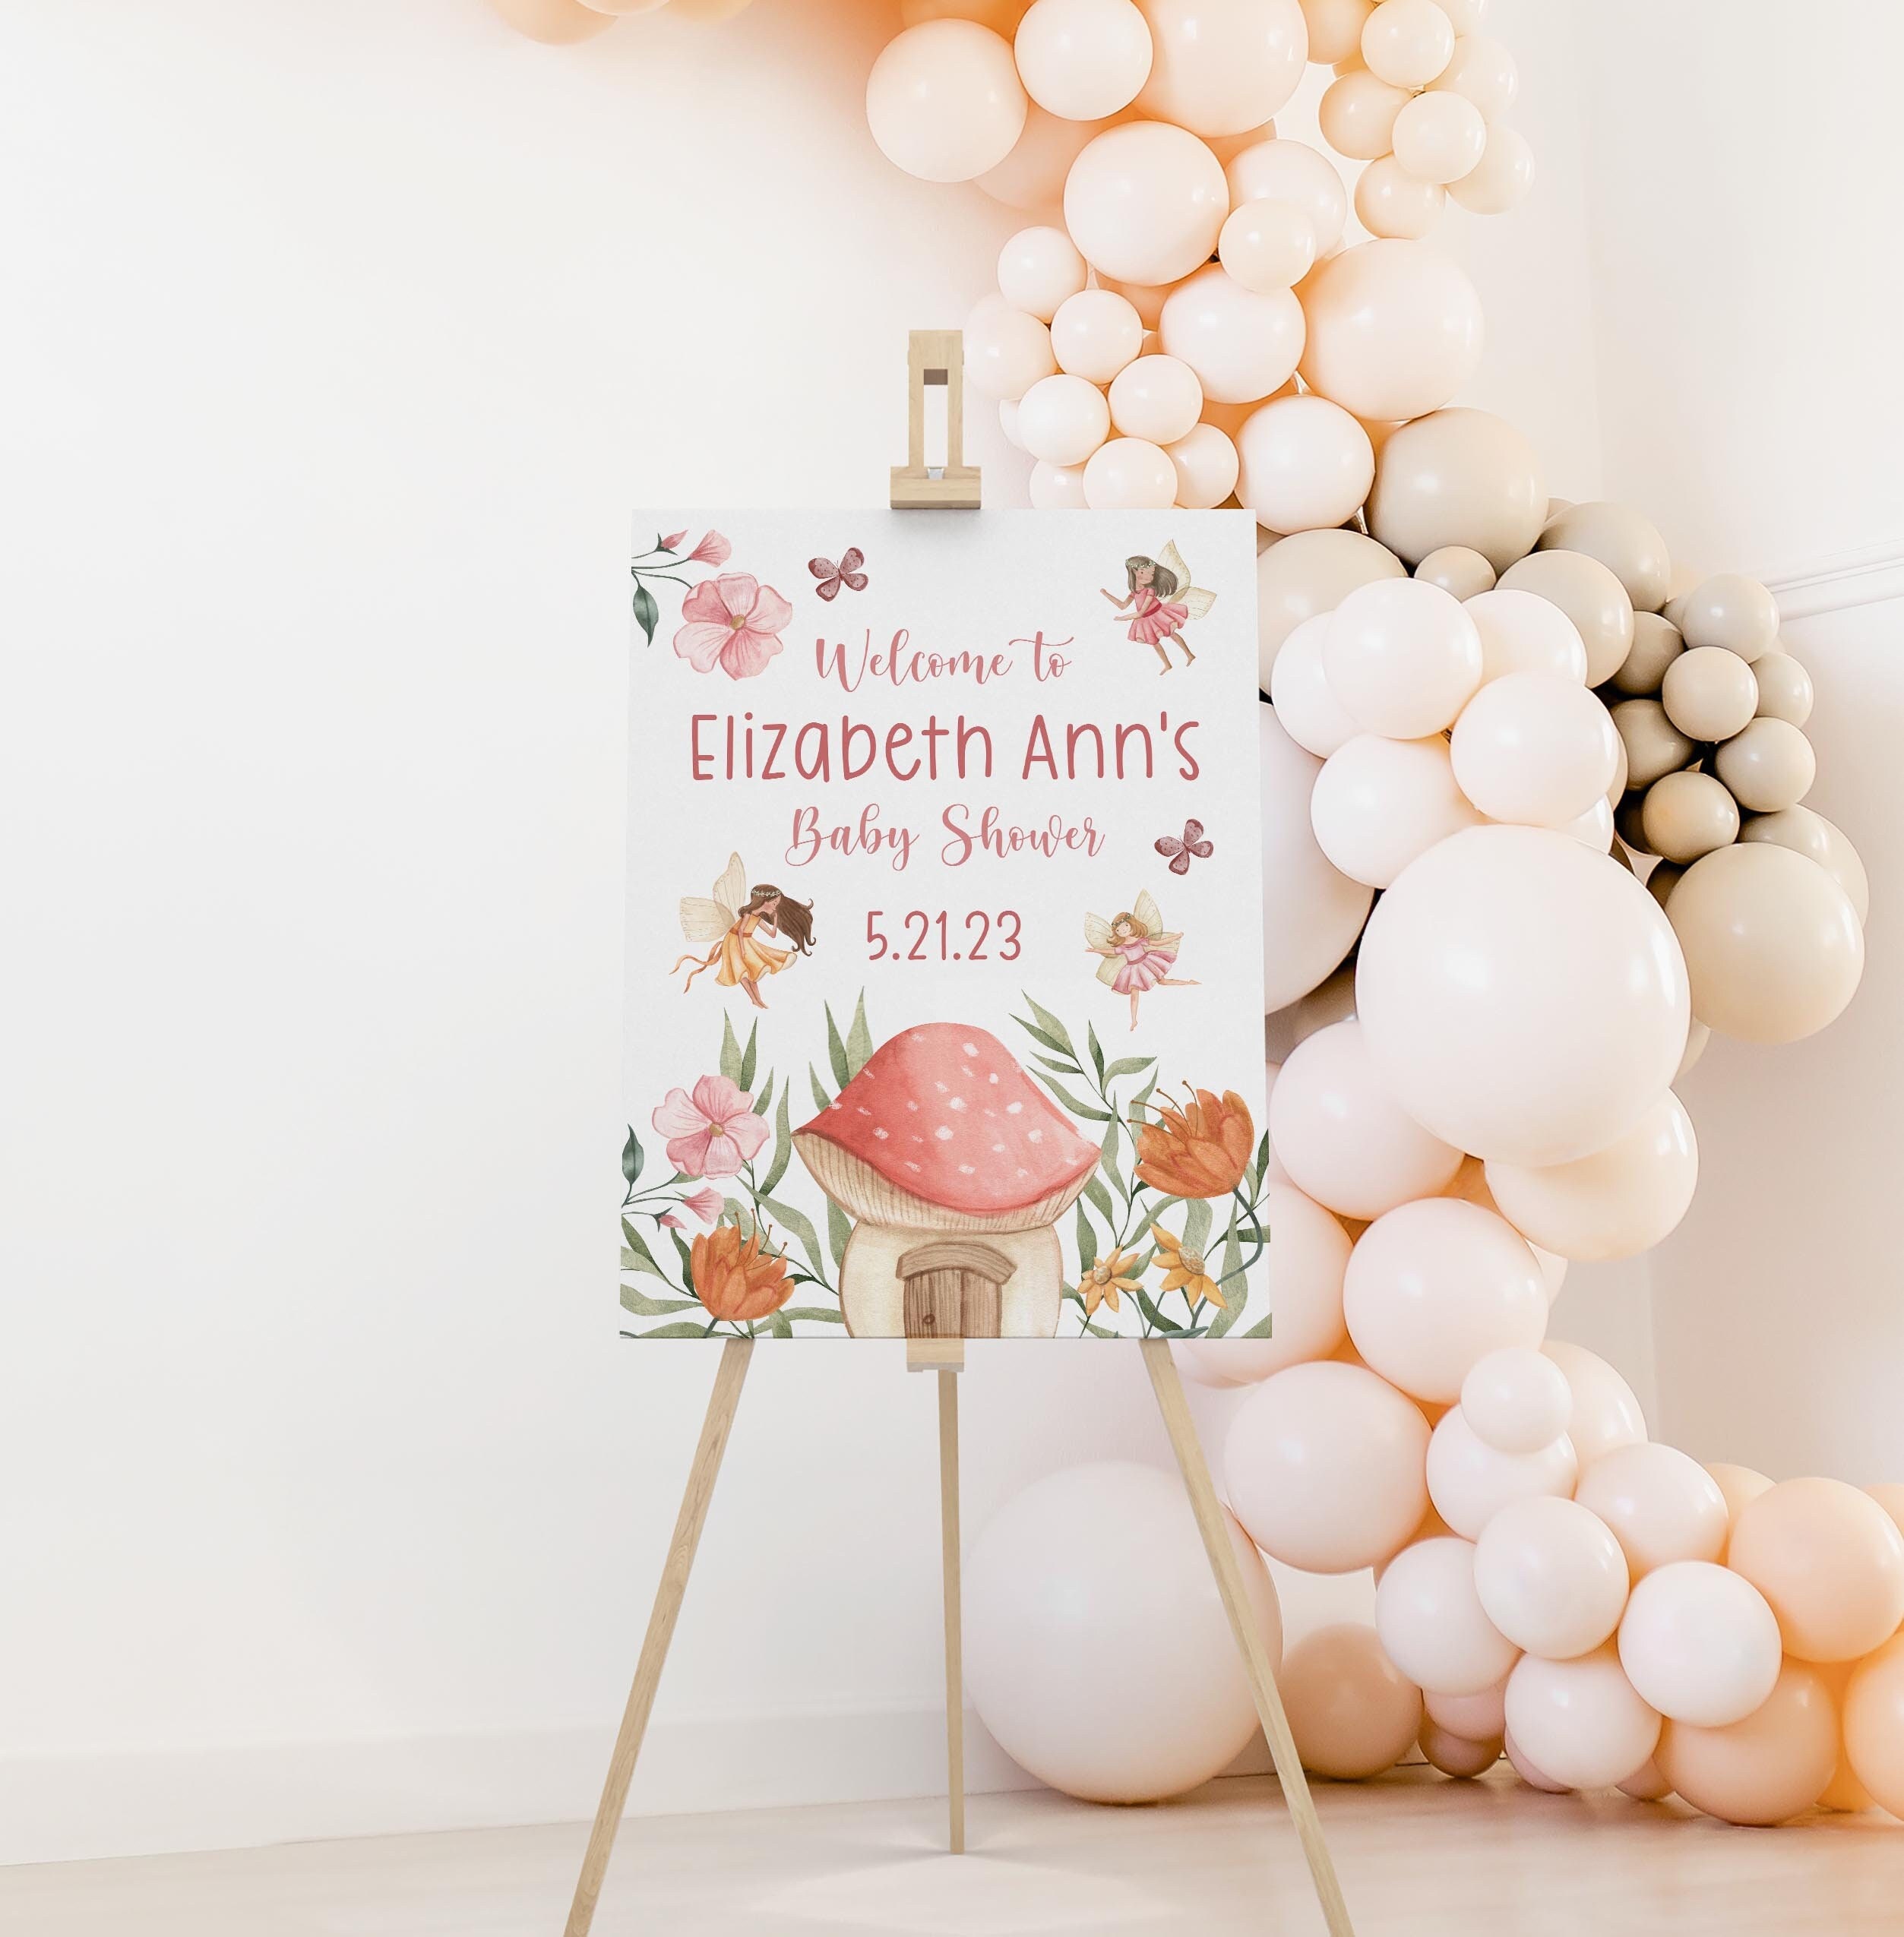  Personalized Baby Shower Sign - Baby Shower Welcome Sign -  Custom Fall Season Design for Baby Shower Party Decoration - Baby Shower  Signs : Handmade Products